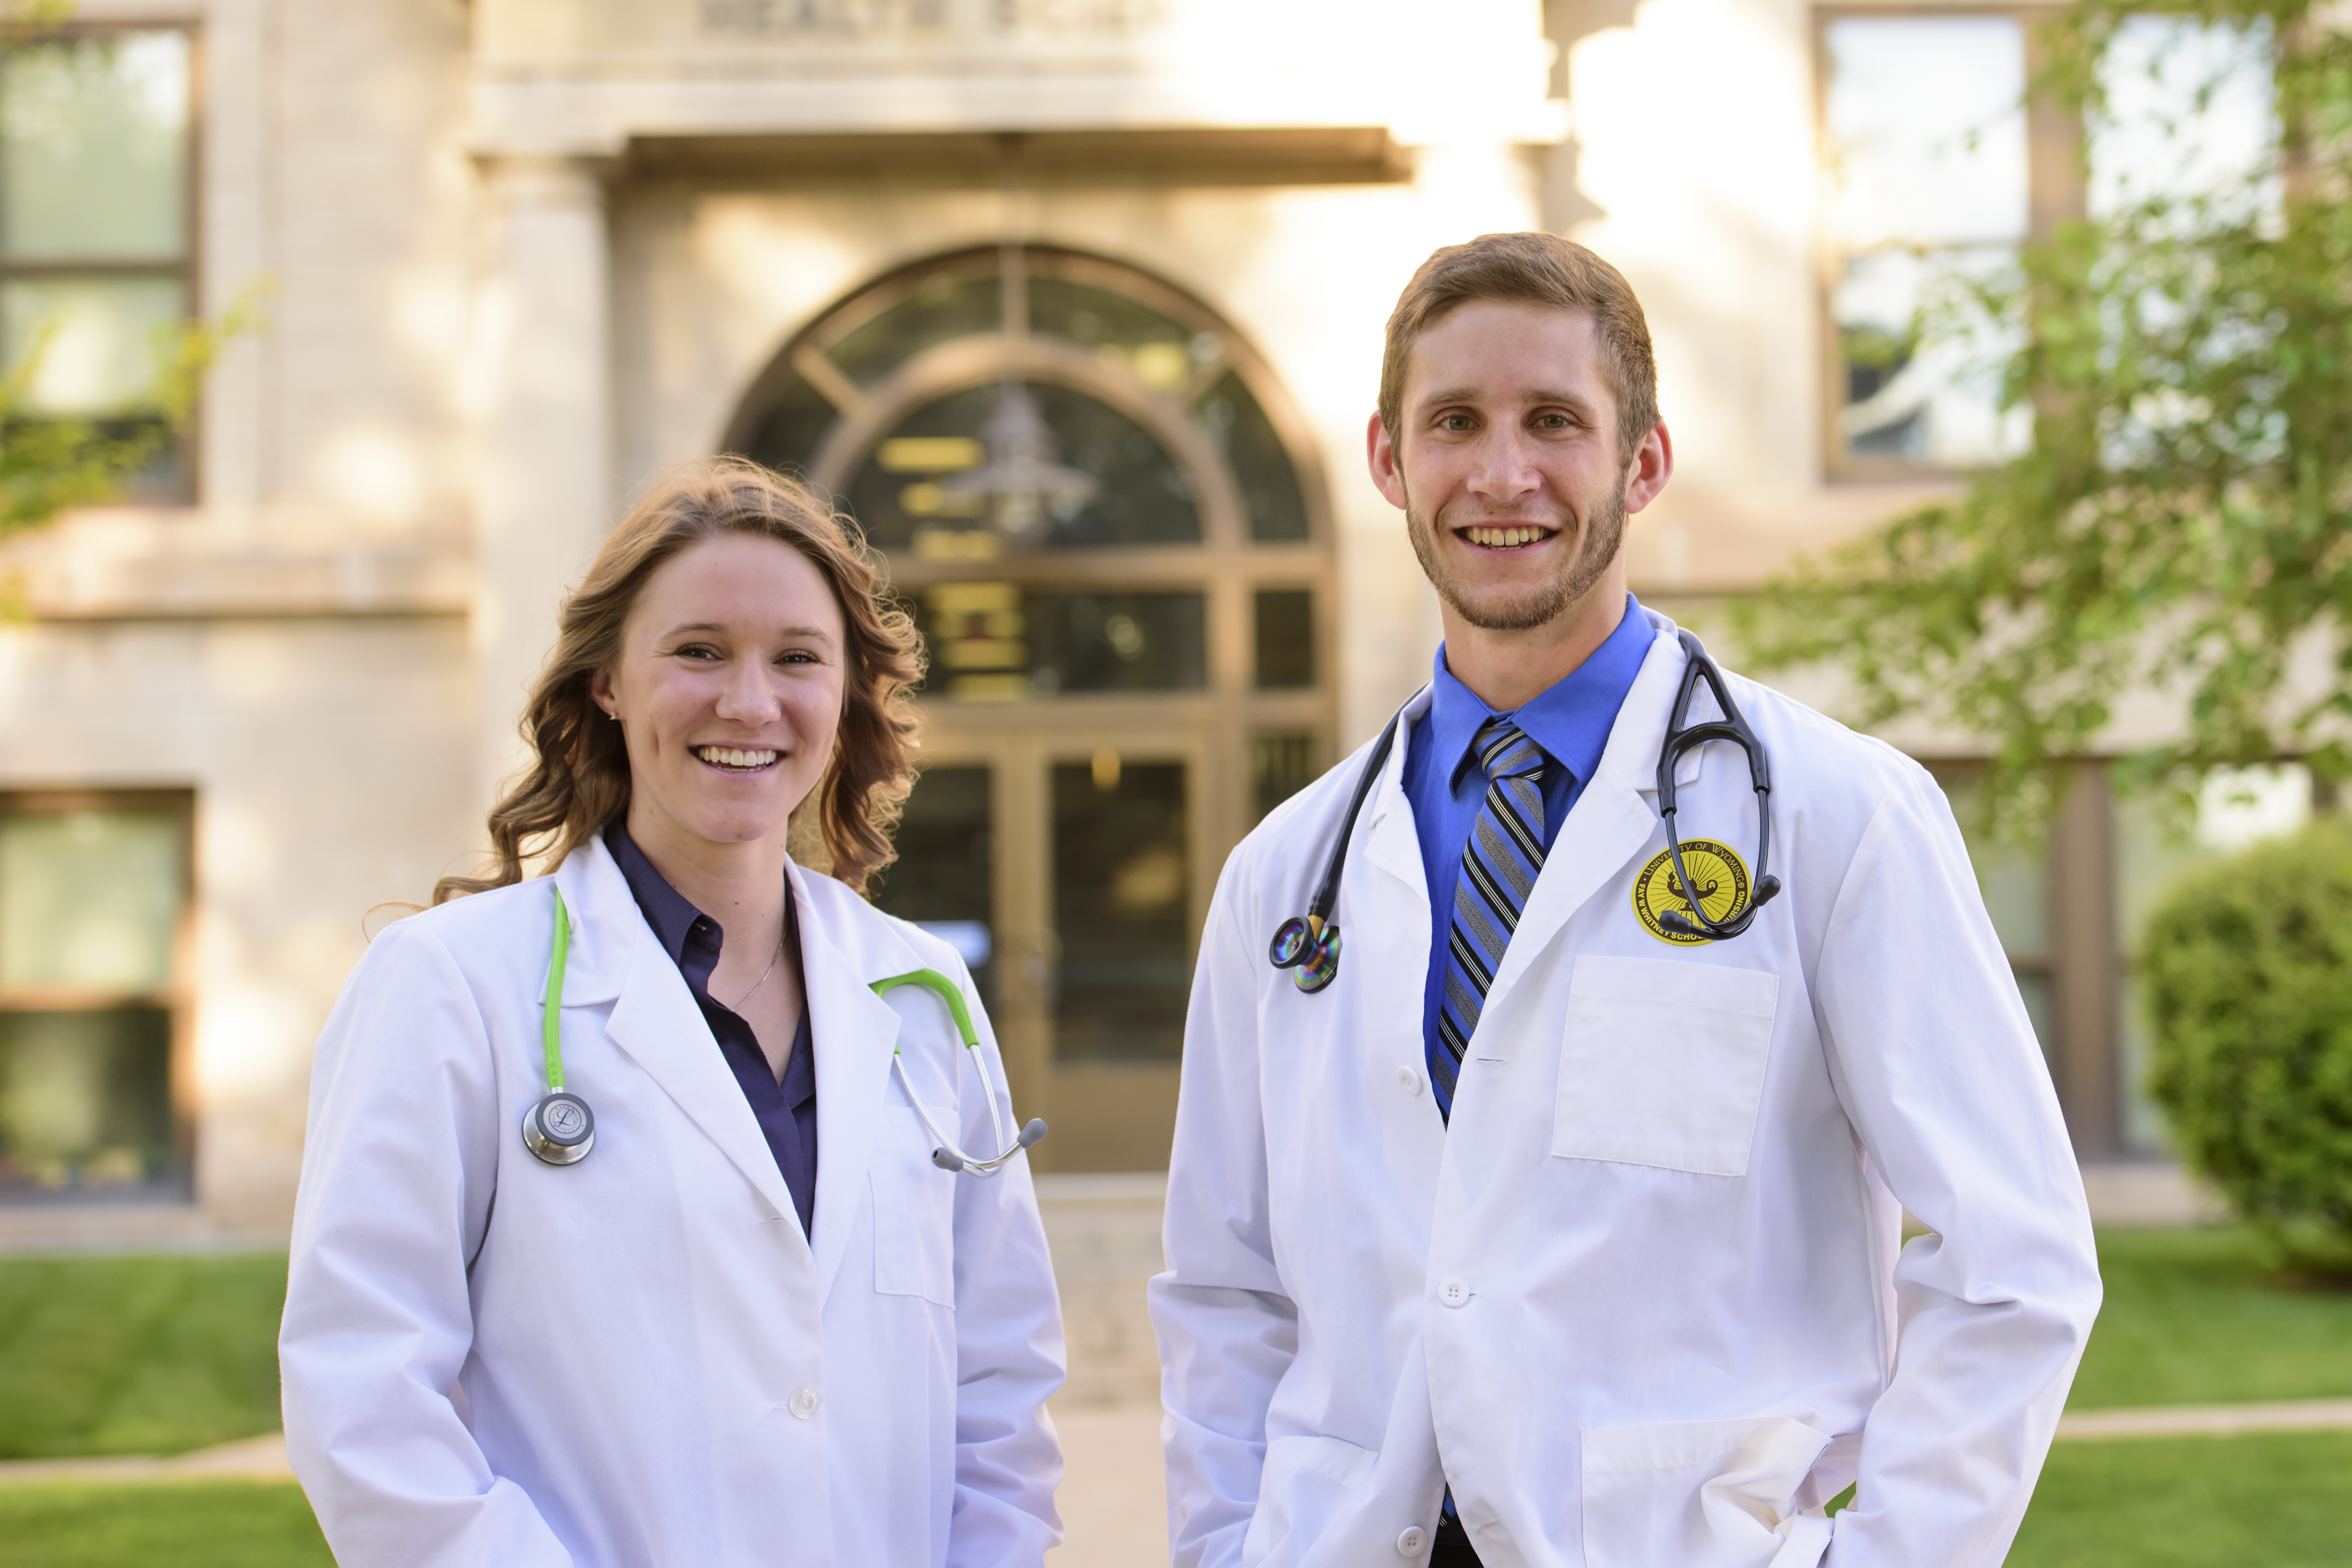 Two smiling students wearing doctor's coats and stethoscopes